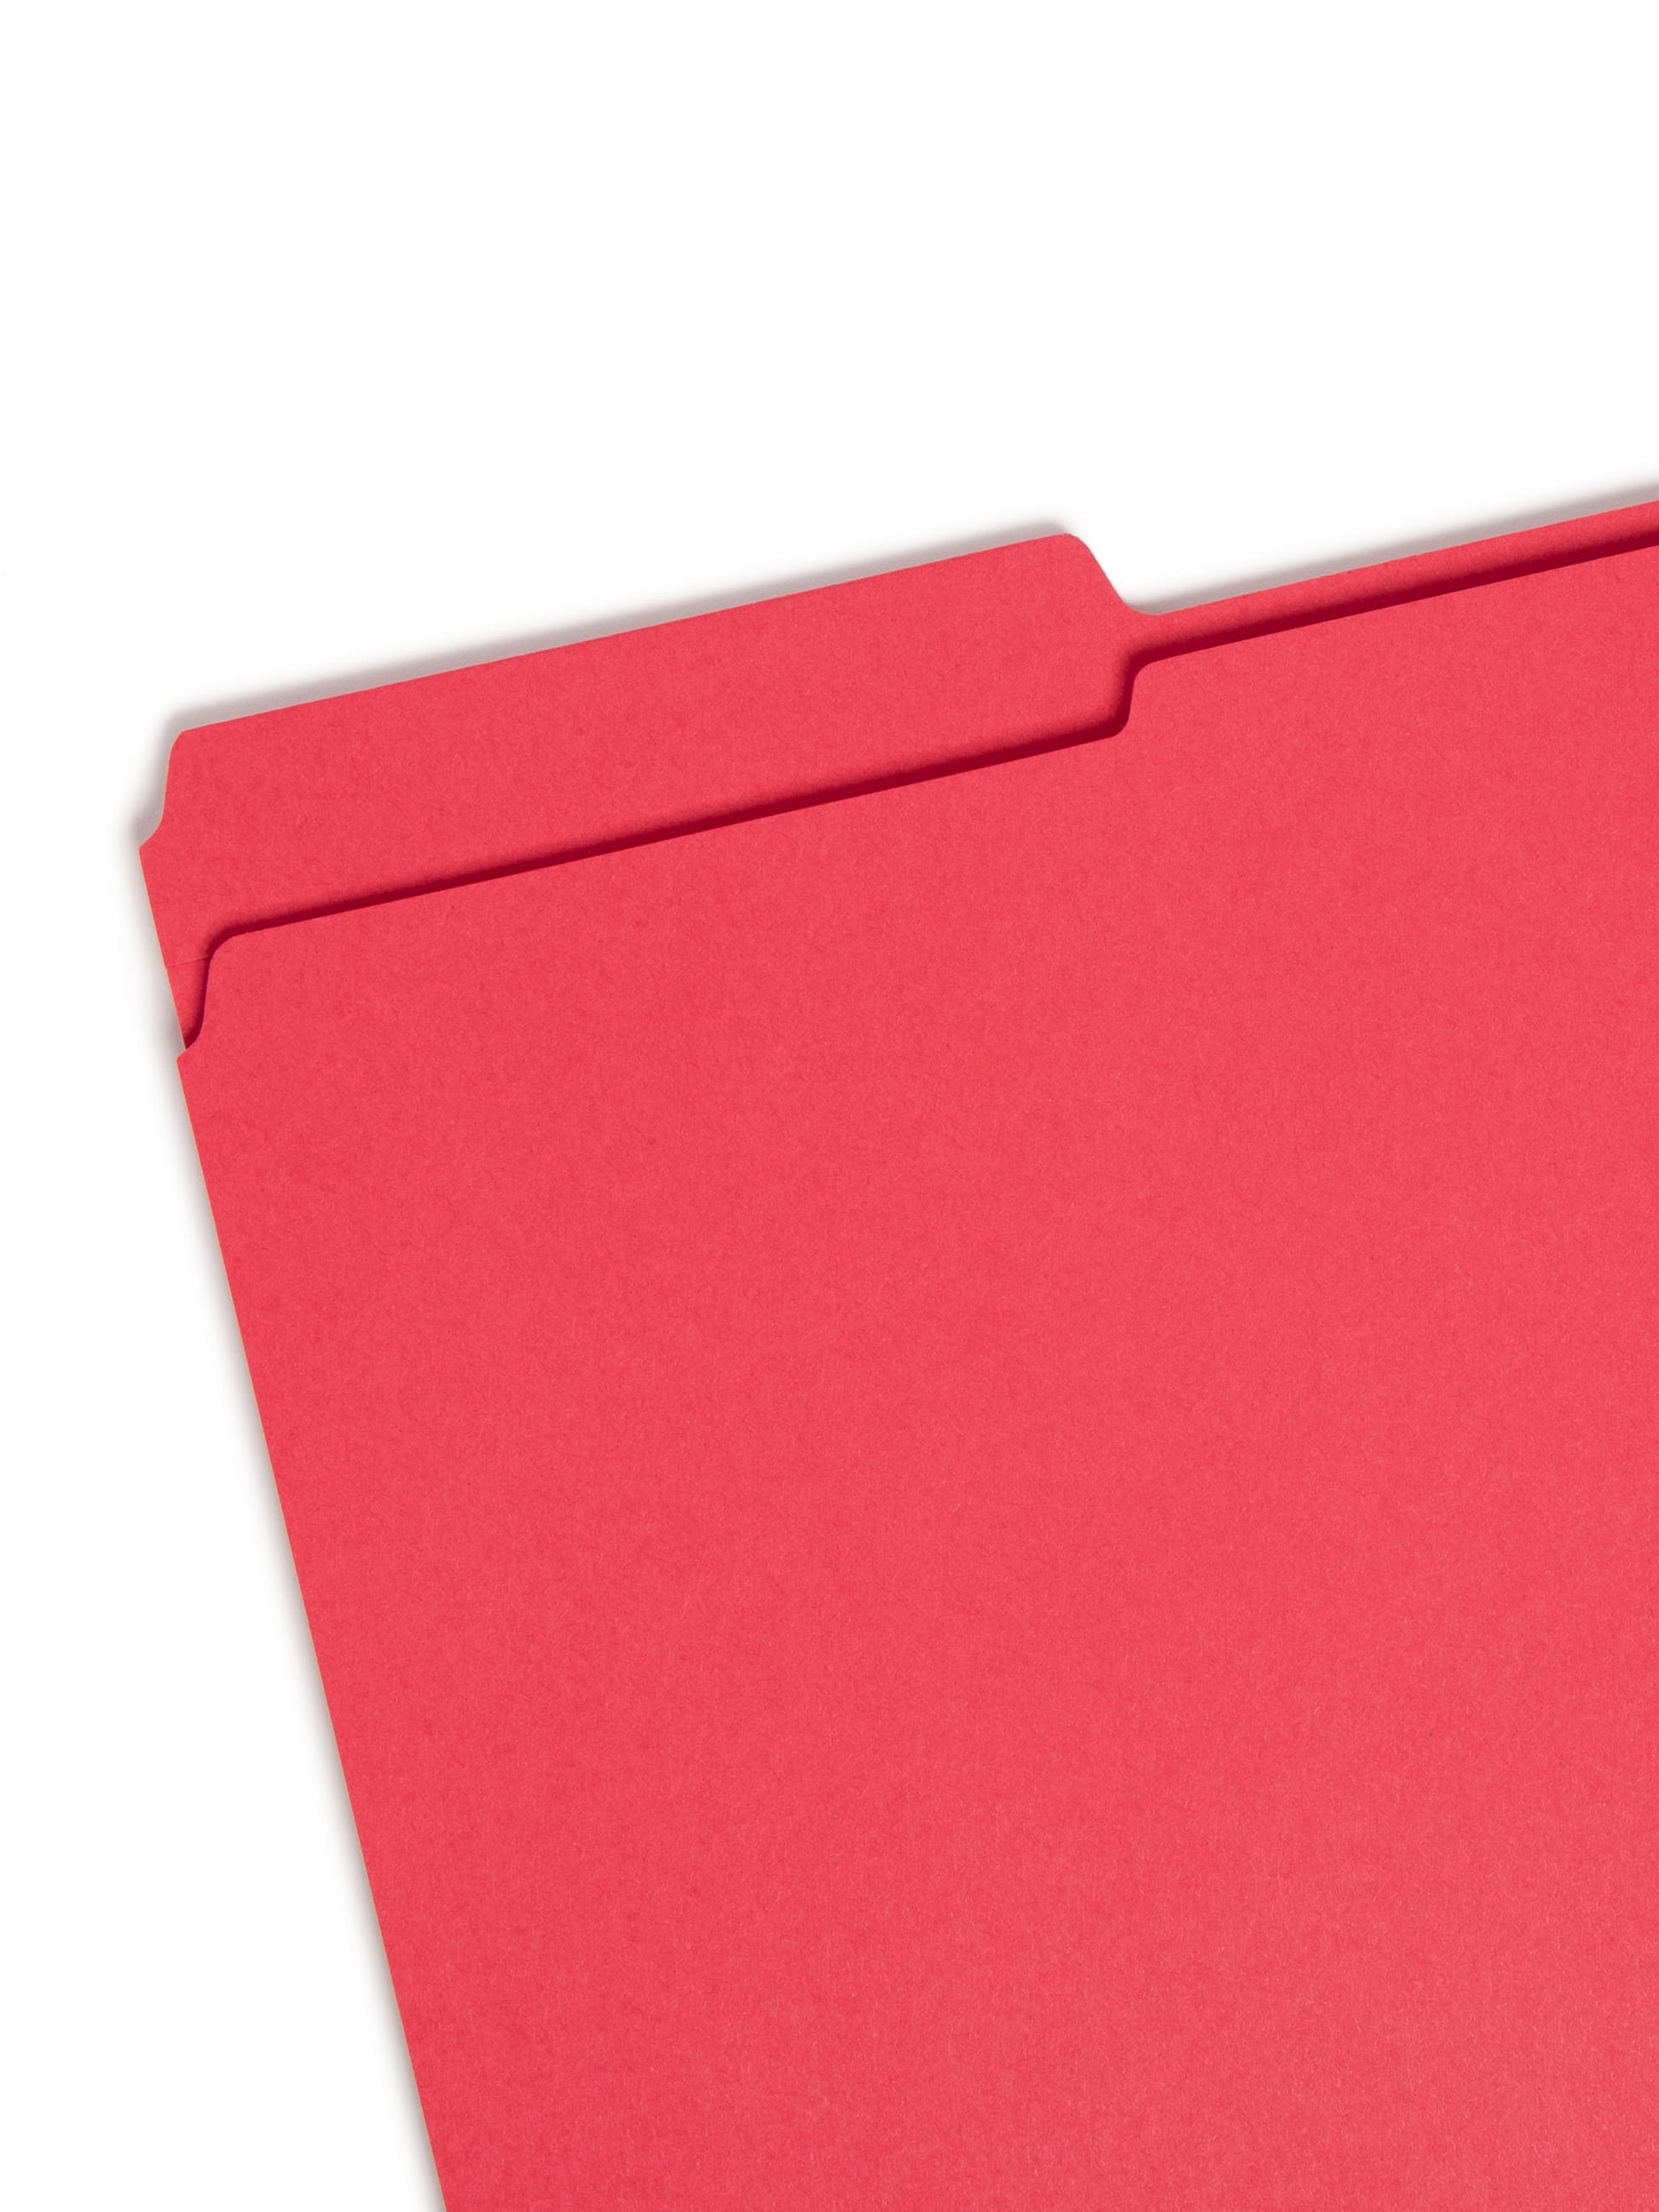 Reinforced Tab File Folders, 1/3-Cut Tab, Red Color, Legal Size, Set of 100, 086486177344